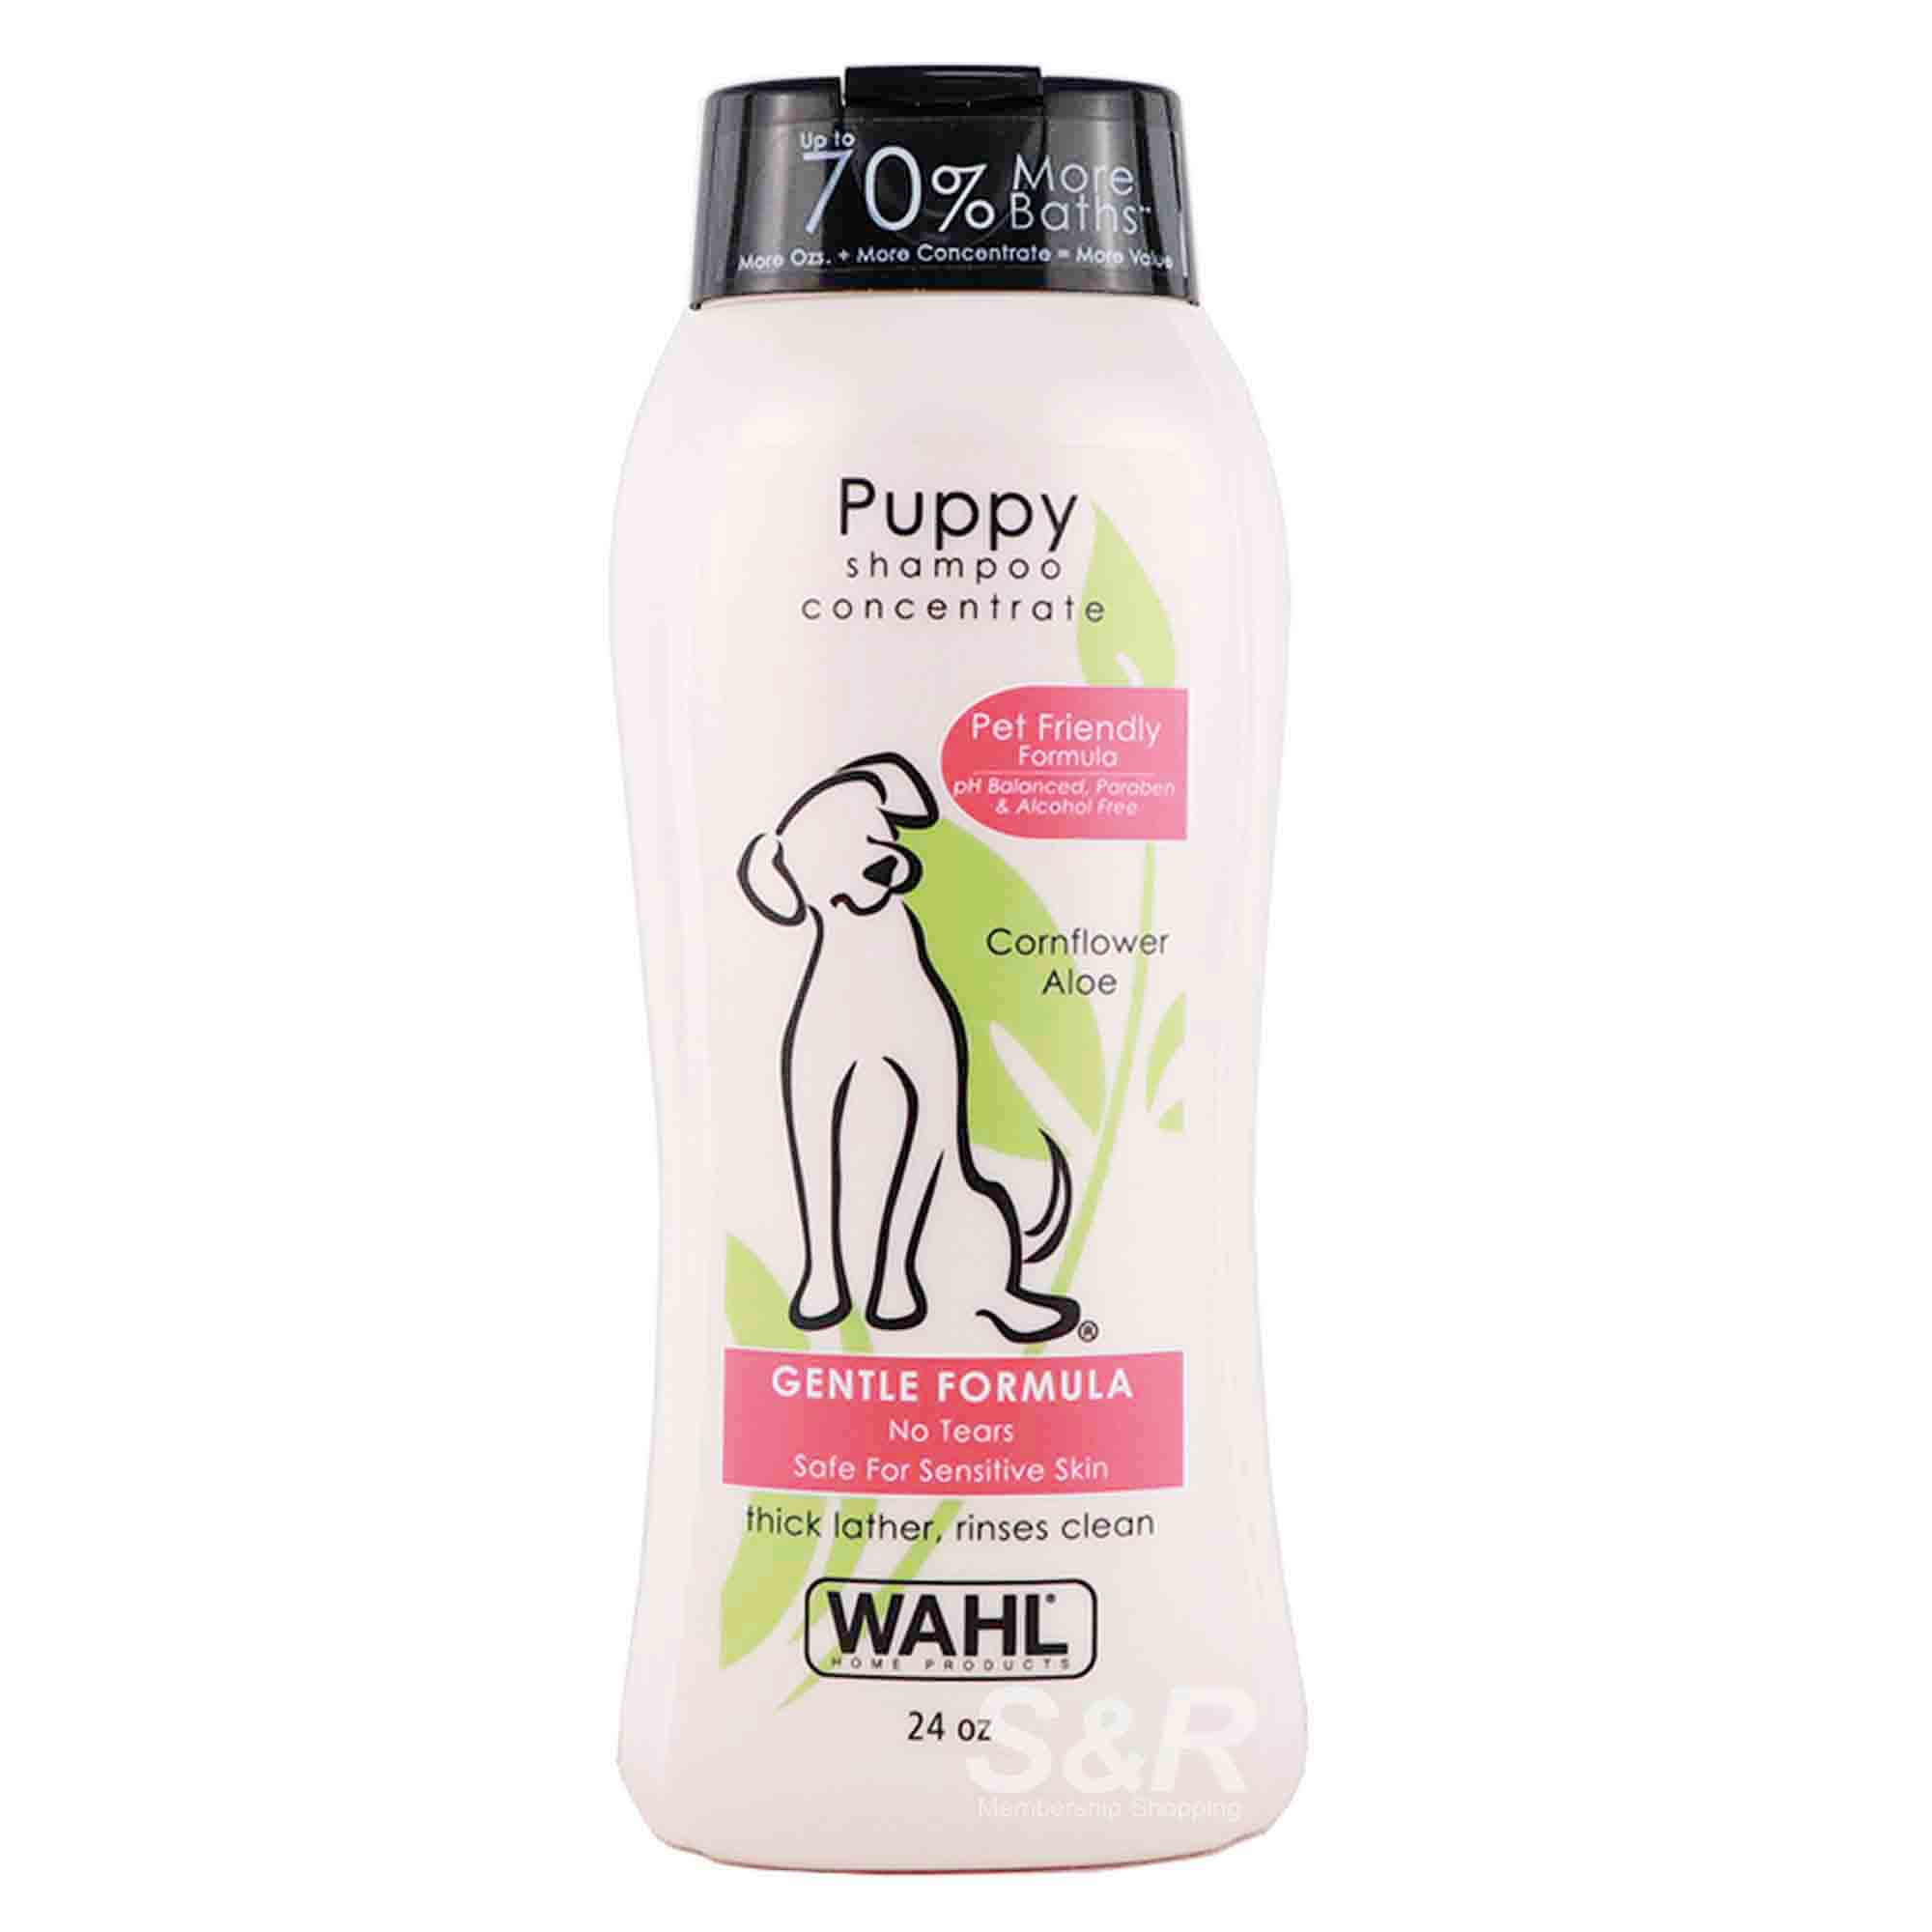 Wahl Puppy Shampoo Concentrate 710mL